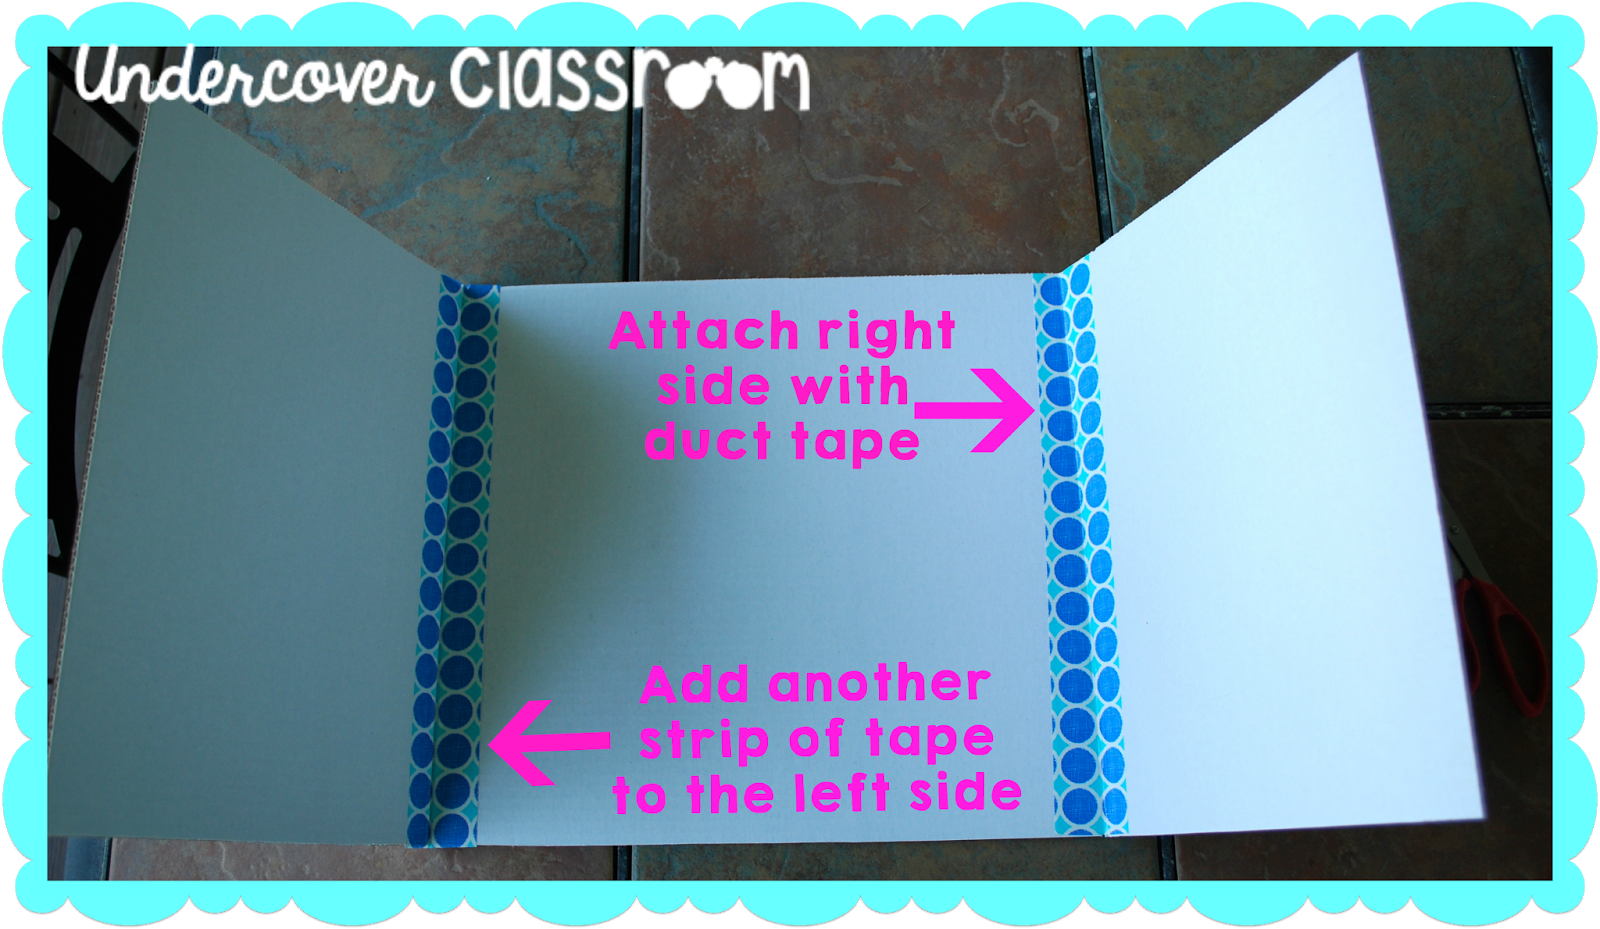 Do It Yourself Privacy Folders Undercover Classroom